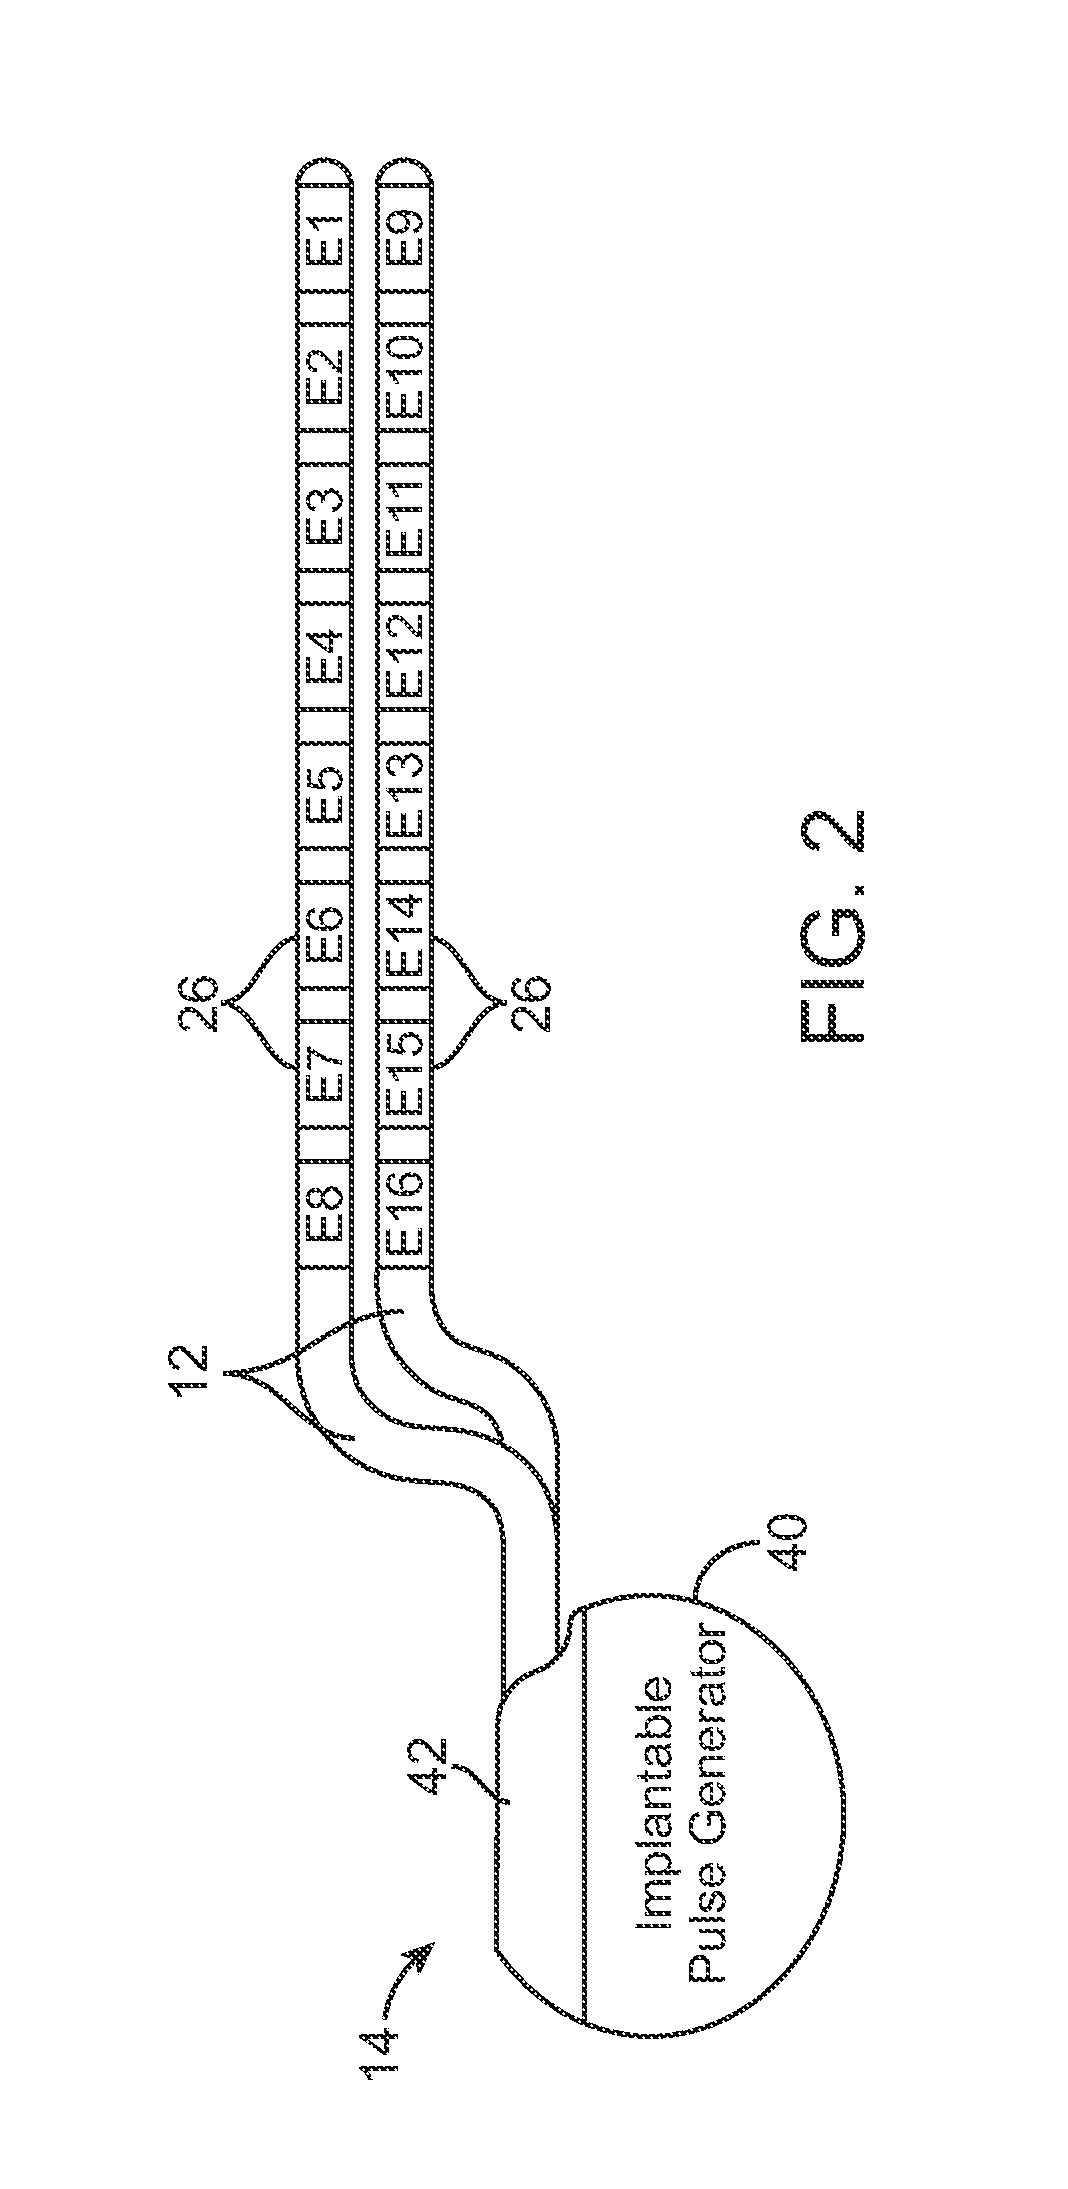 System and method for adjusting automatic pulse parameters to selectively activate nerve fibers